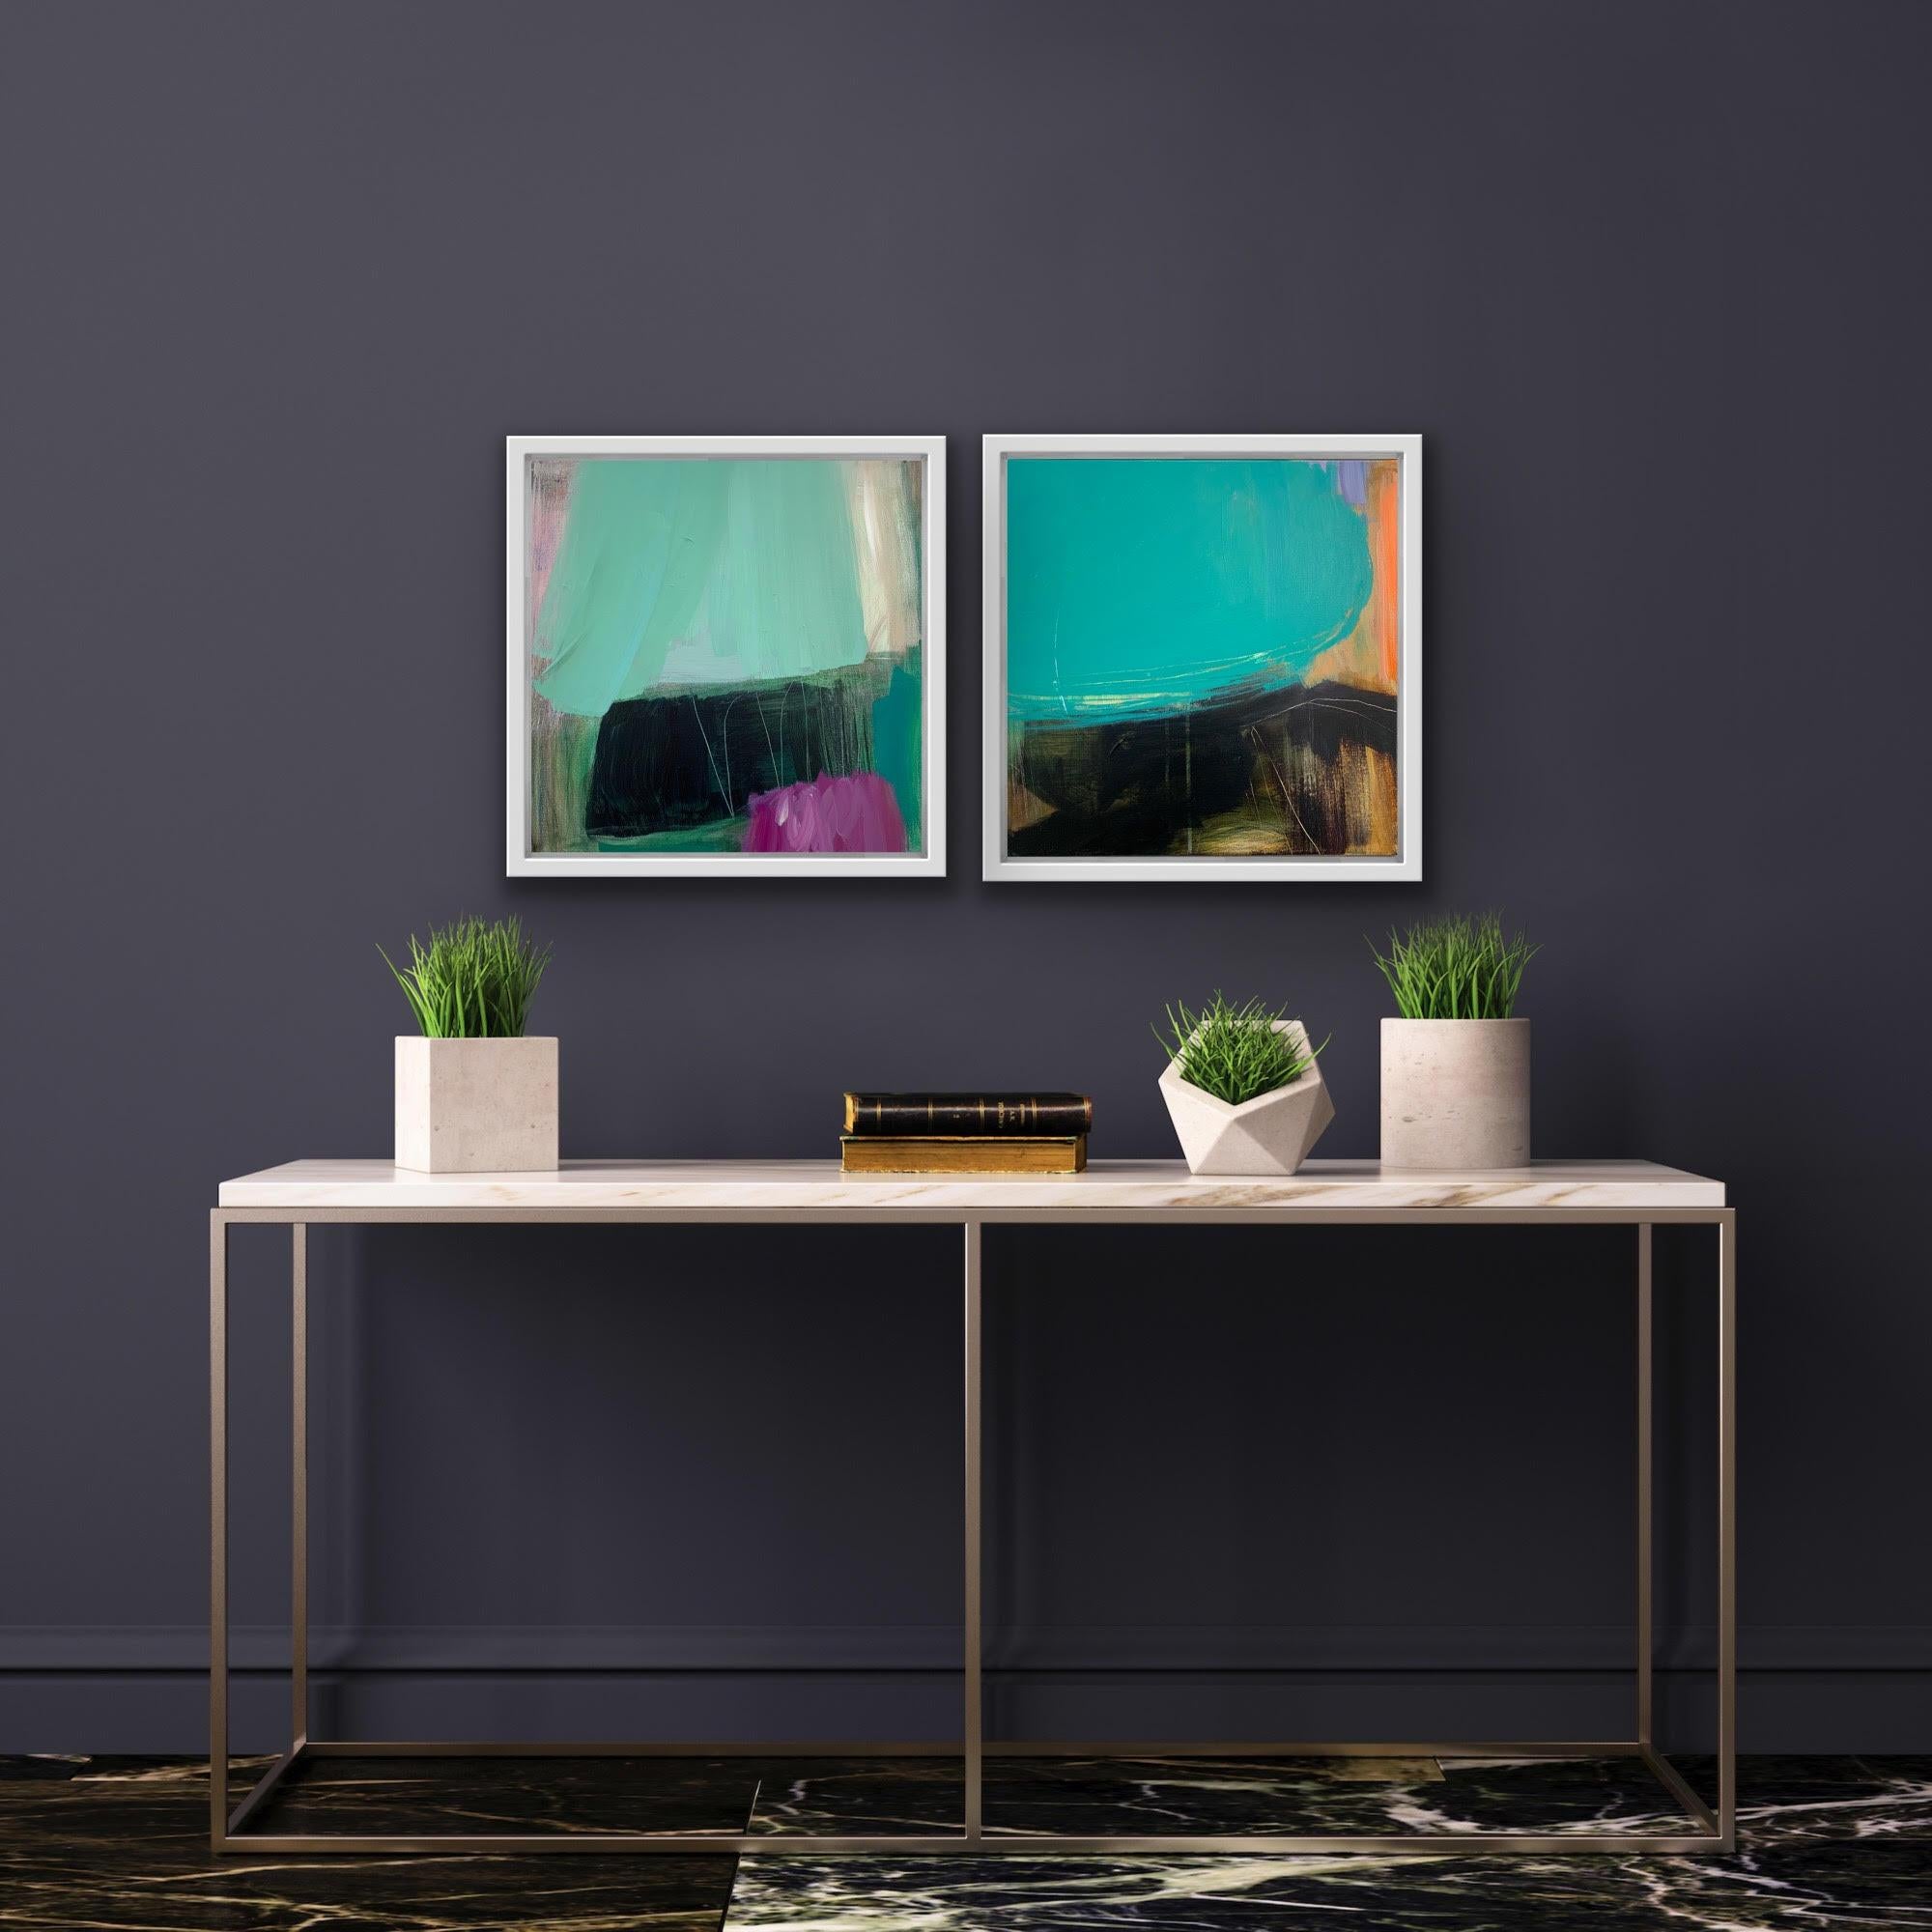 Fell 3 and Fell 5 Diptych  - Gray Abstract Painting by Jill Campbell